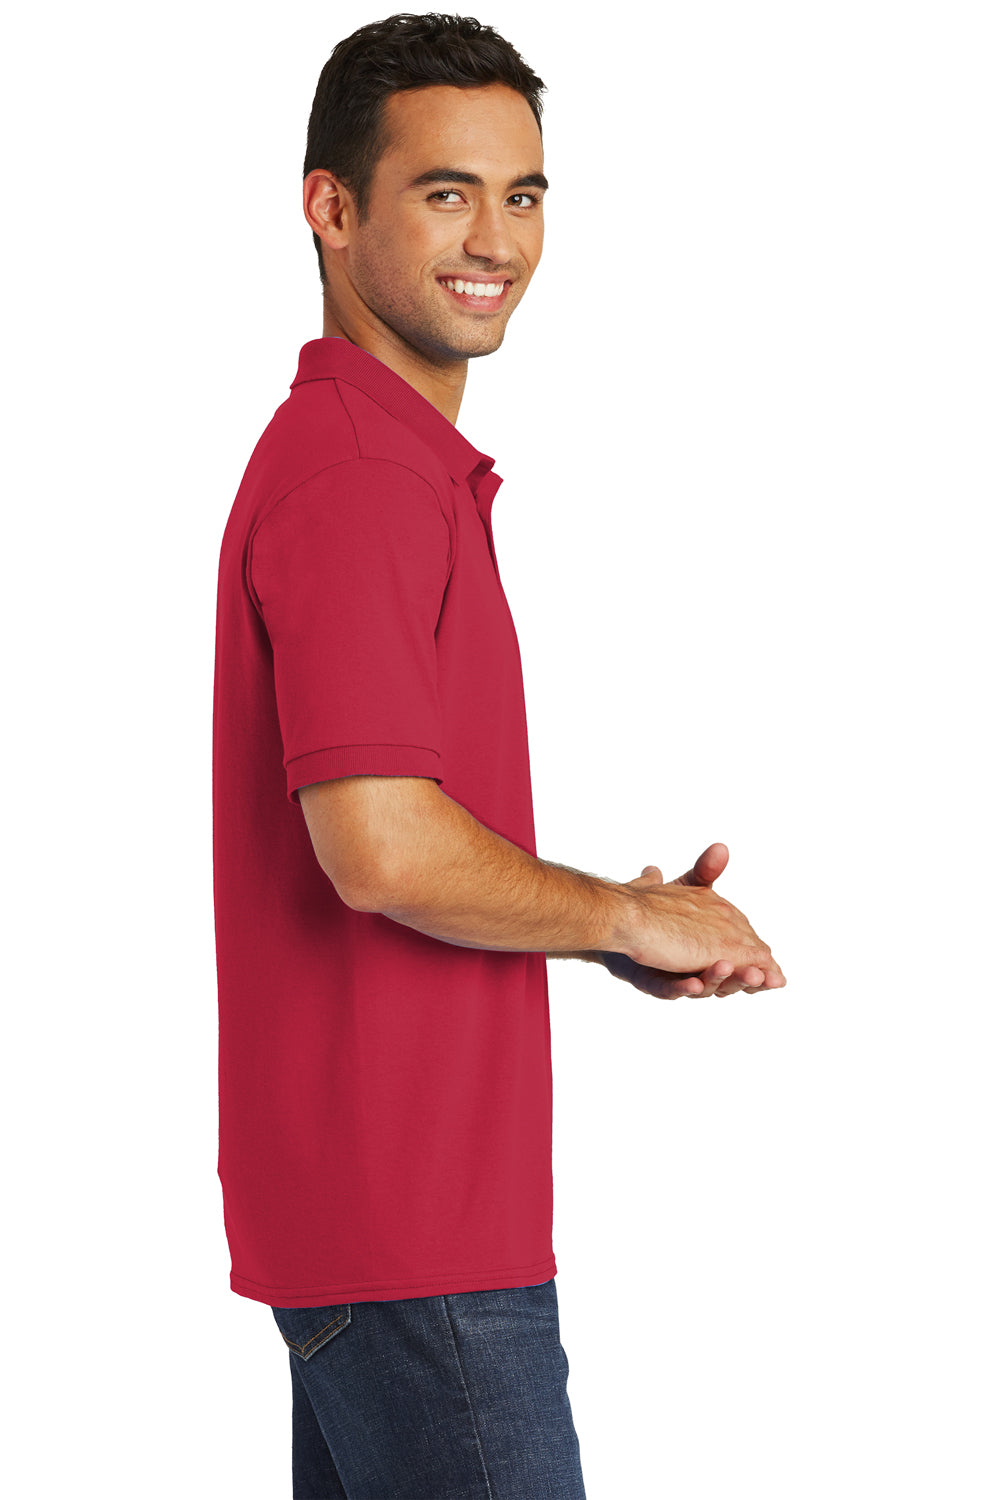 Port & Company KP55 Mens Core Stain Resistant Short Sleeve Polo Shirt Red Side